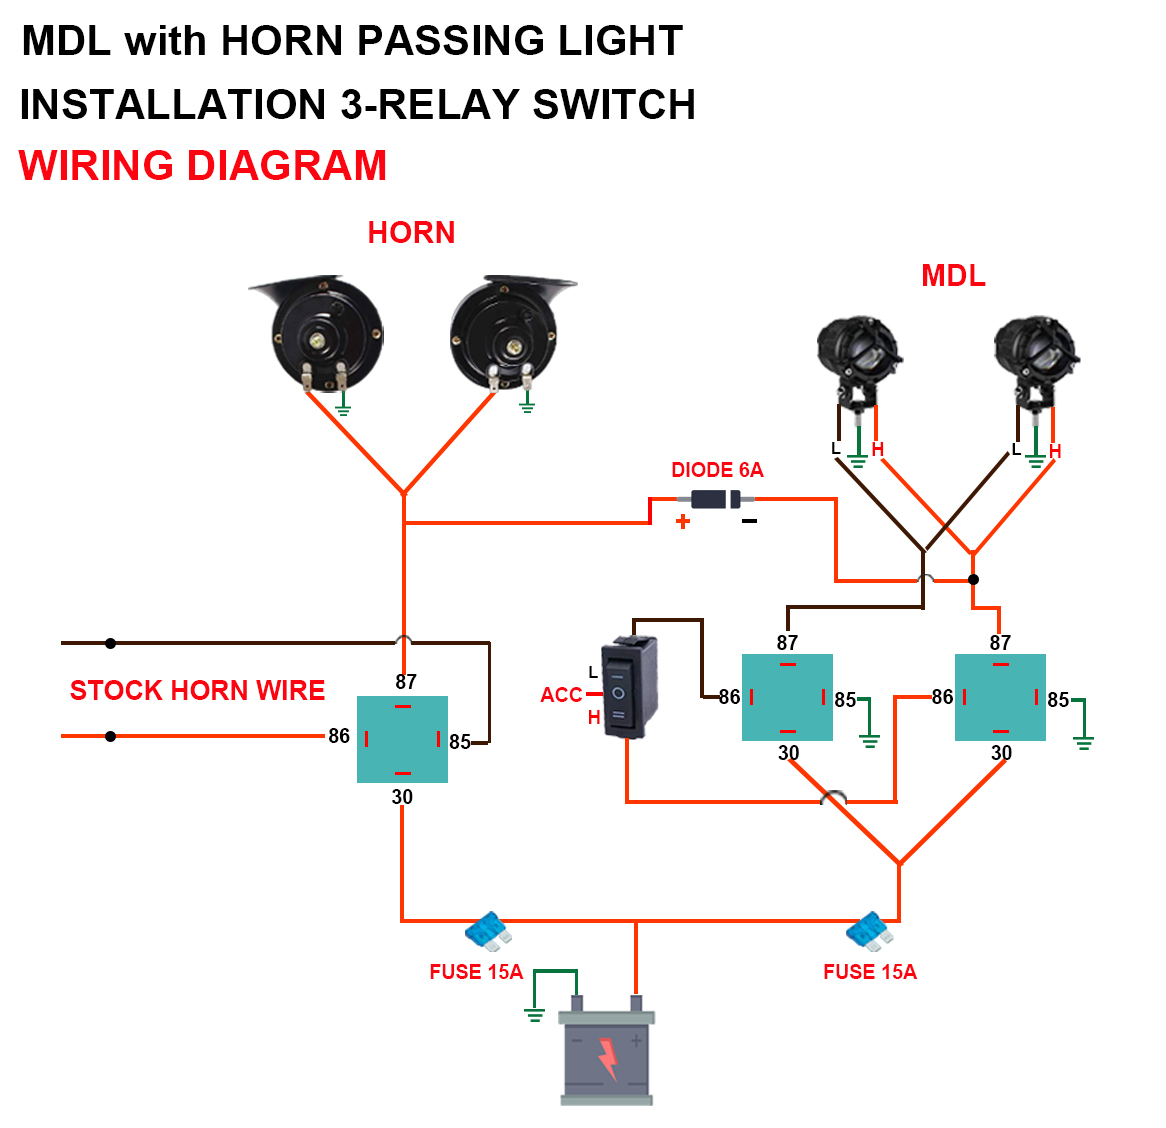 PASSING LIGHT MDL HIGH LOW with HORN 3-RELAY WIRING SETUP, MINI RELAY 5-PIN  SONGLE SPDT 12V 10A 250V Lazada PH